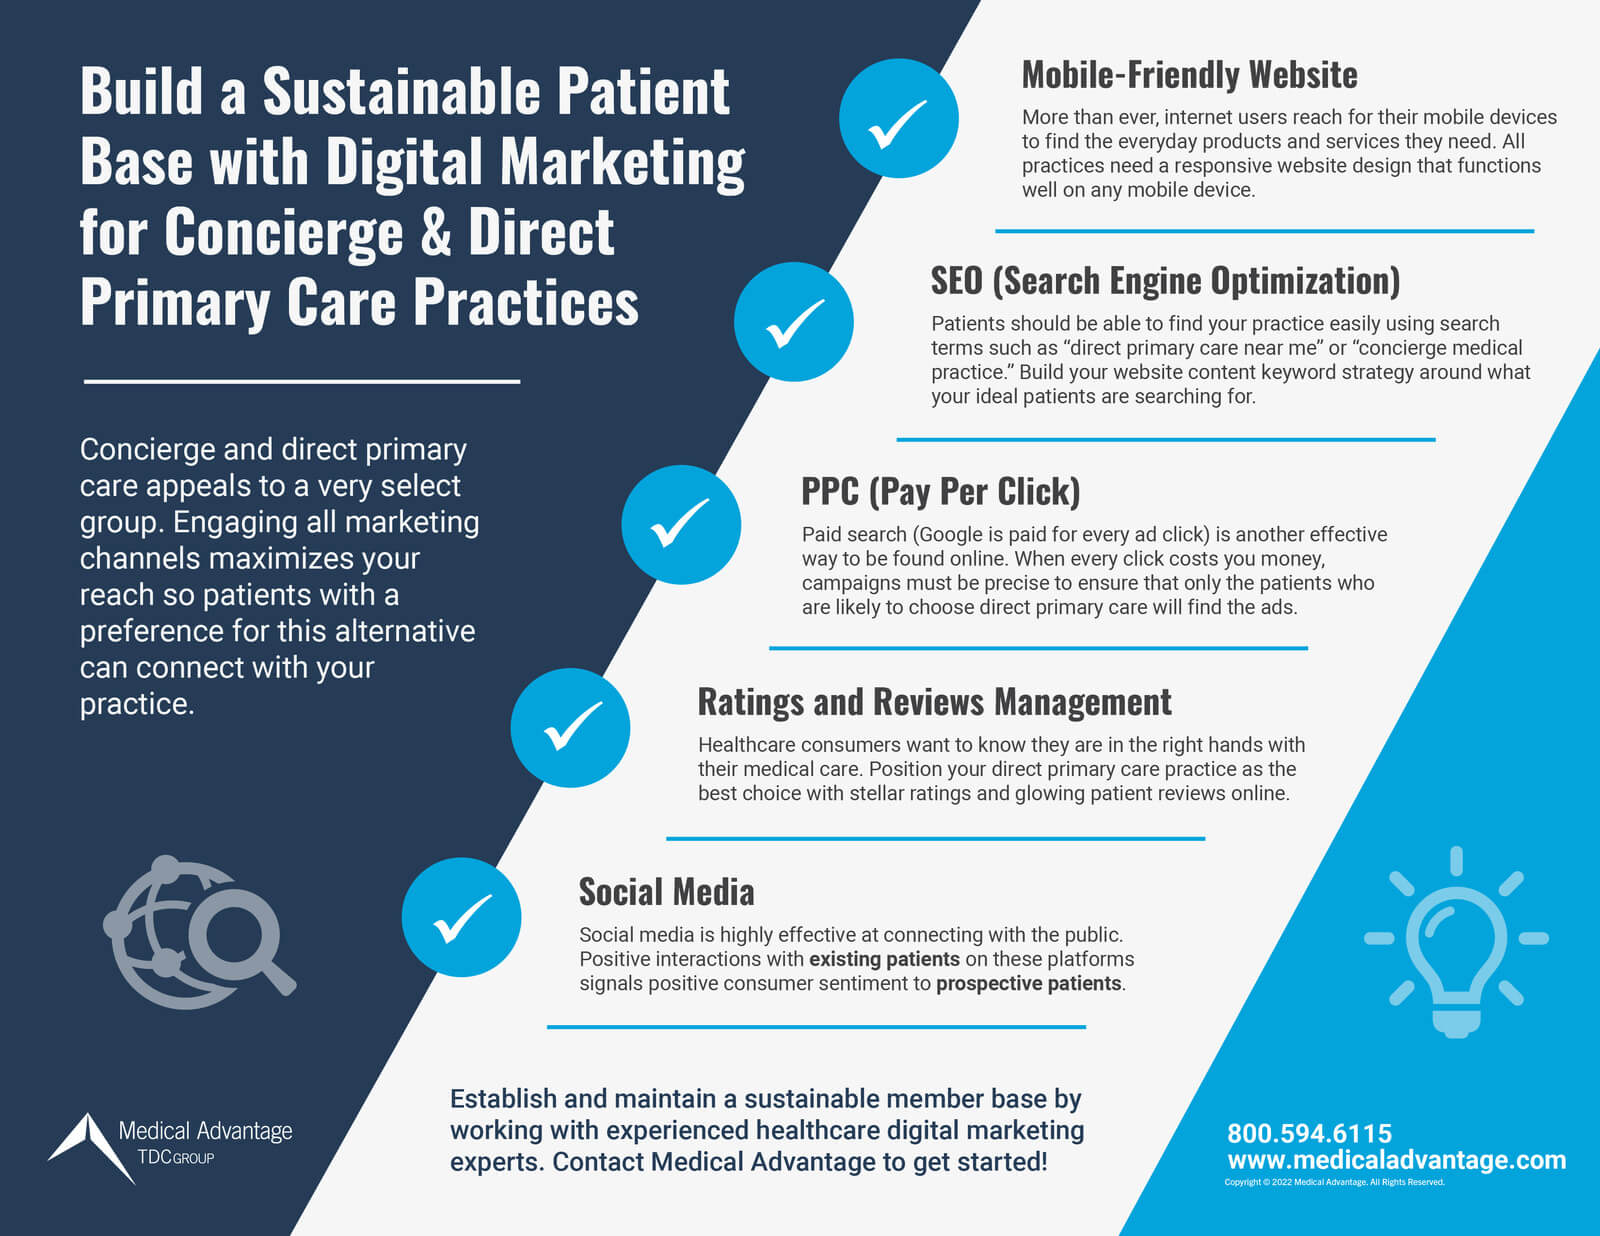 Digital Marketing for Concierge & Direct Primary Care Medical Practices